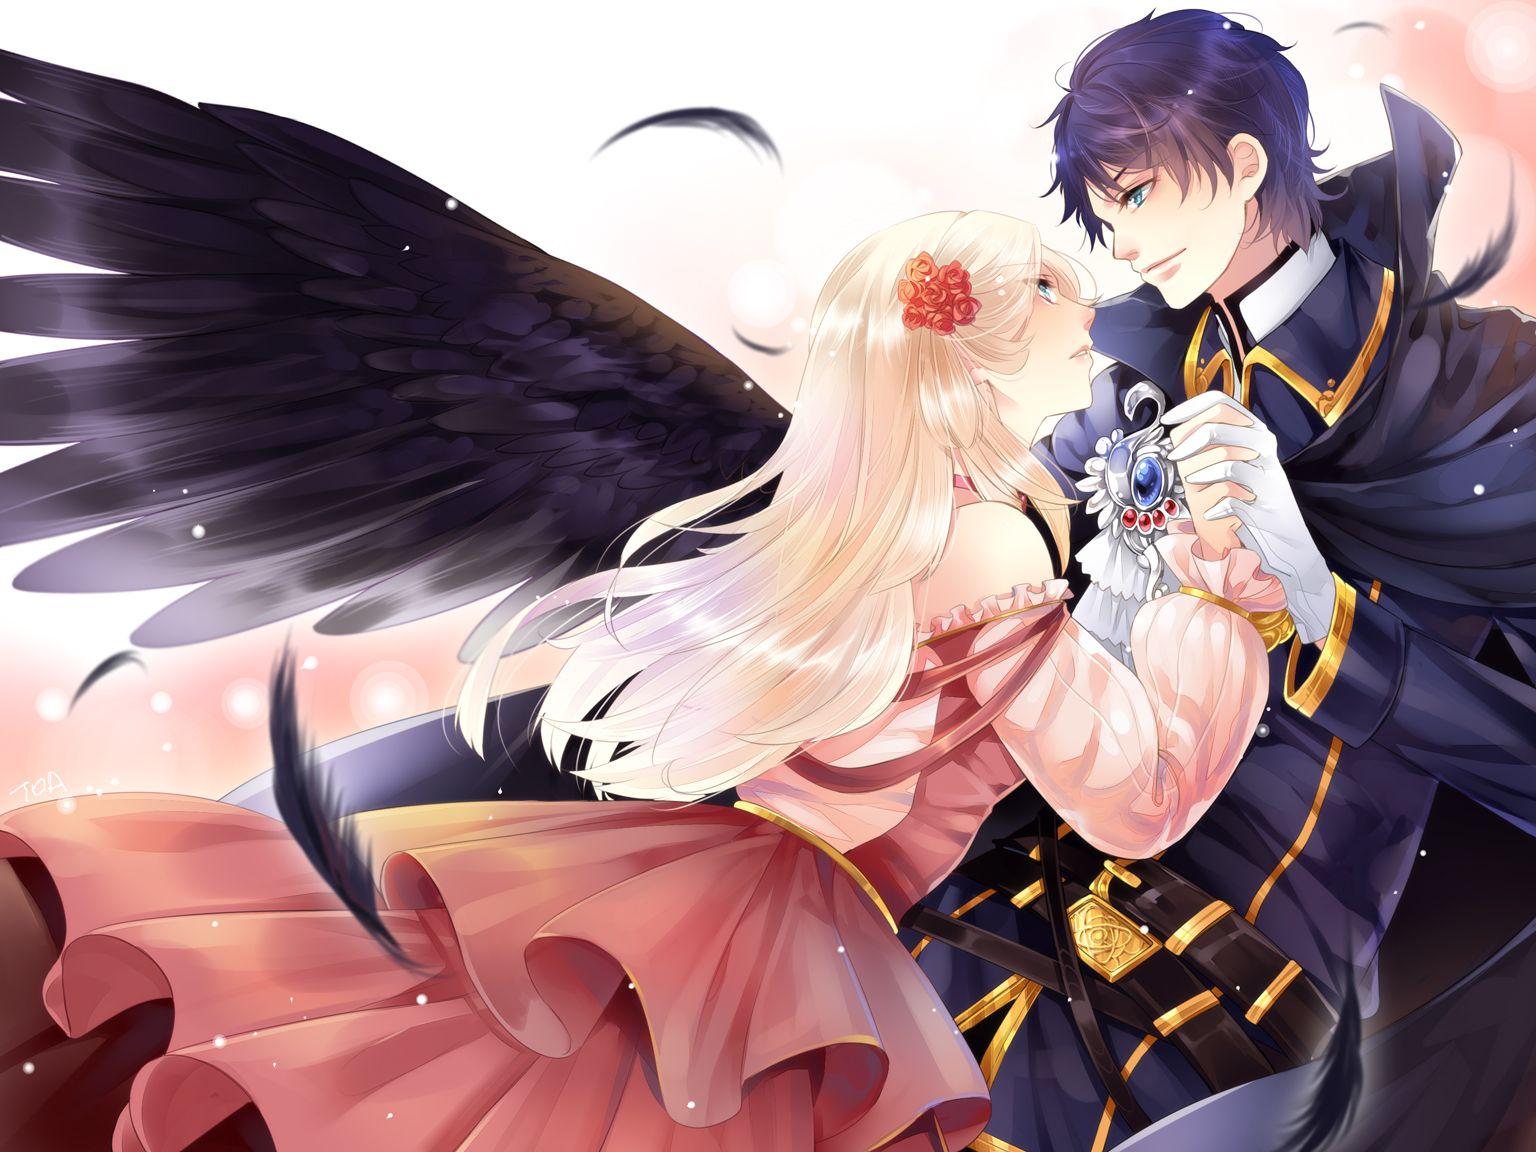 Image for Anime Fallen Angel Boy Wallpapers Cool HD